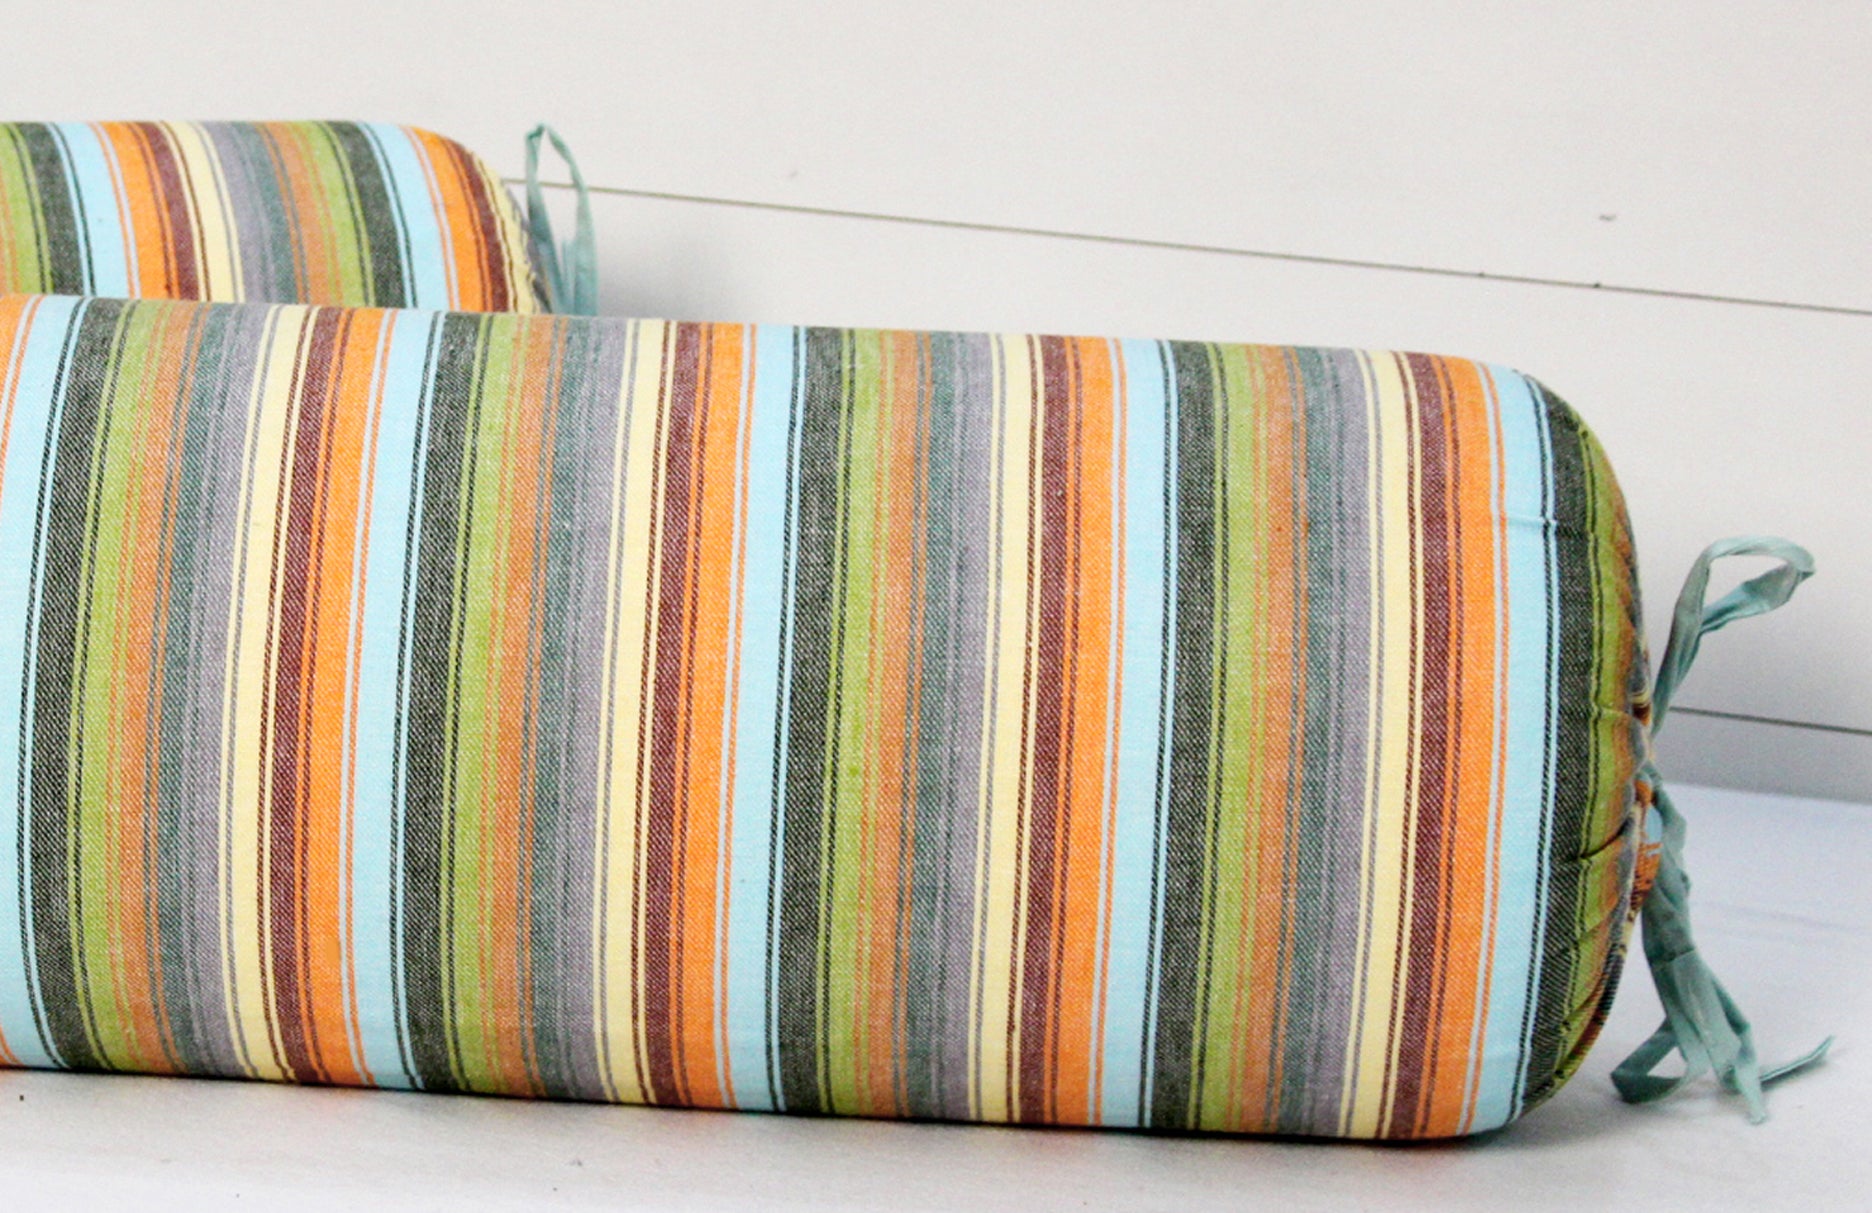 Stylish Stripes Woven Cotton Bolster Cover set (2 Pcs) online in India